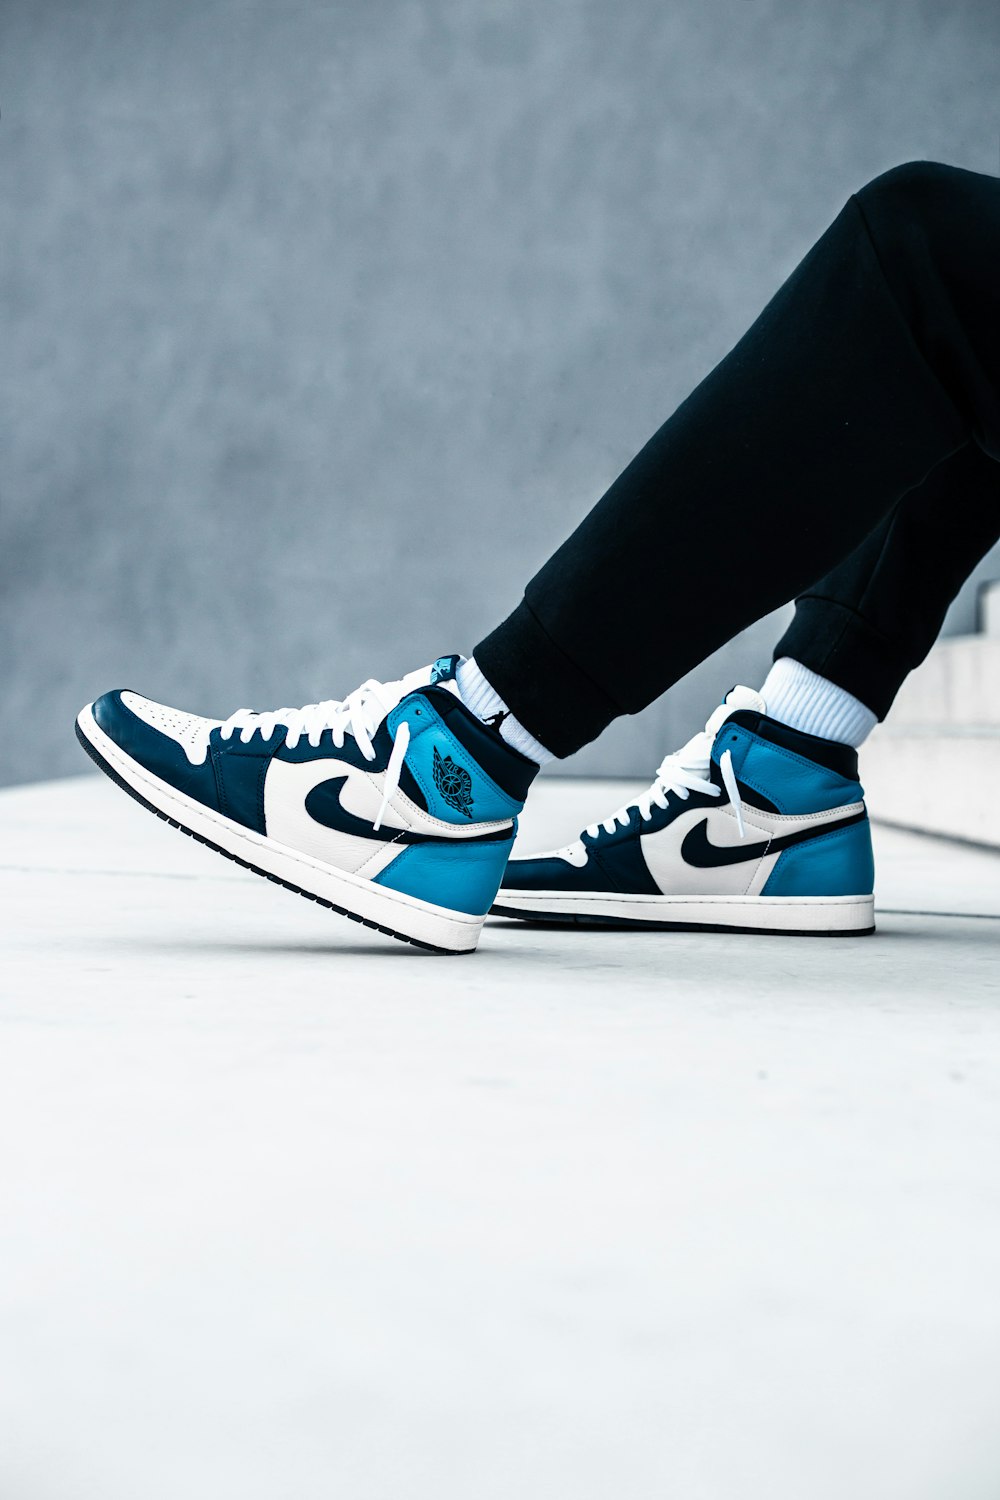 wearing black pants and blue and white nike sneakers photo – Bratislava Image on